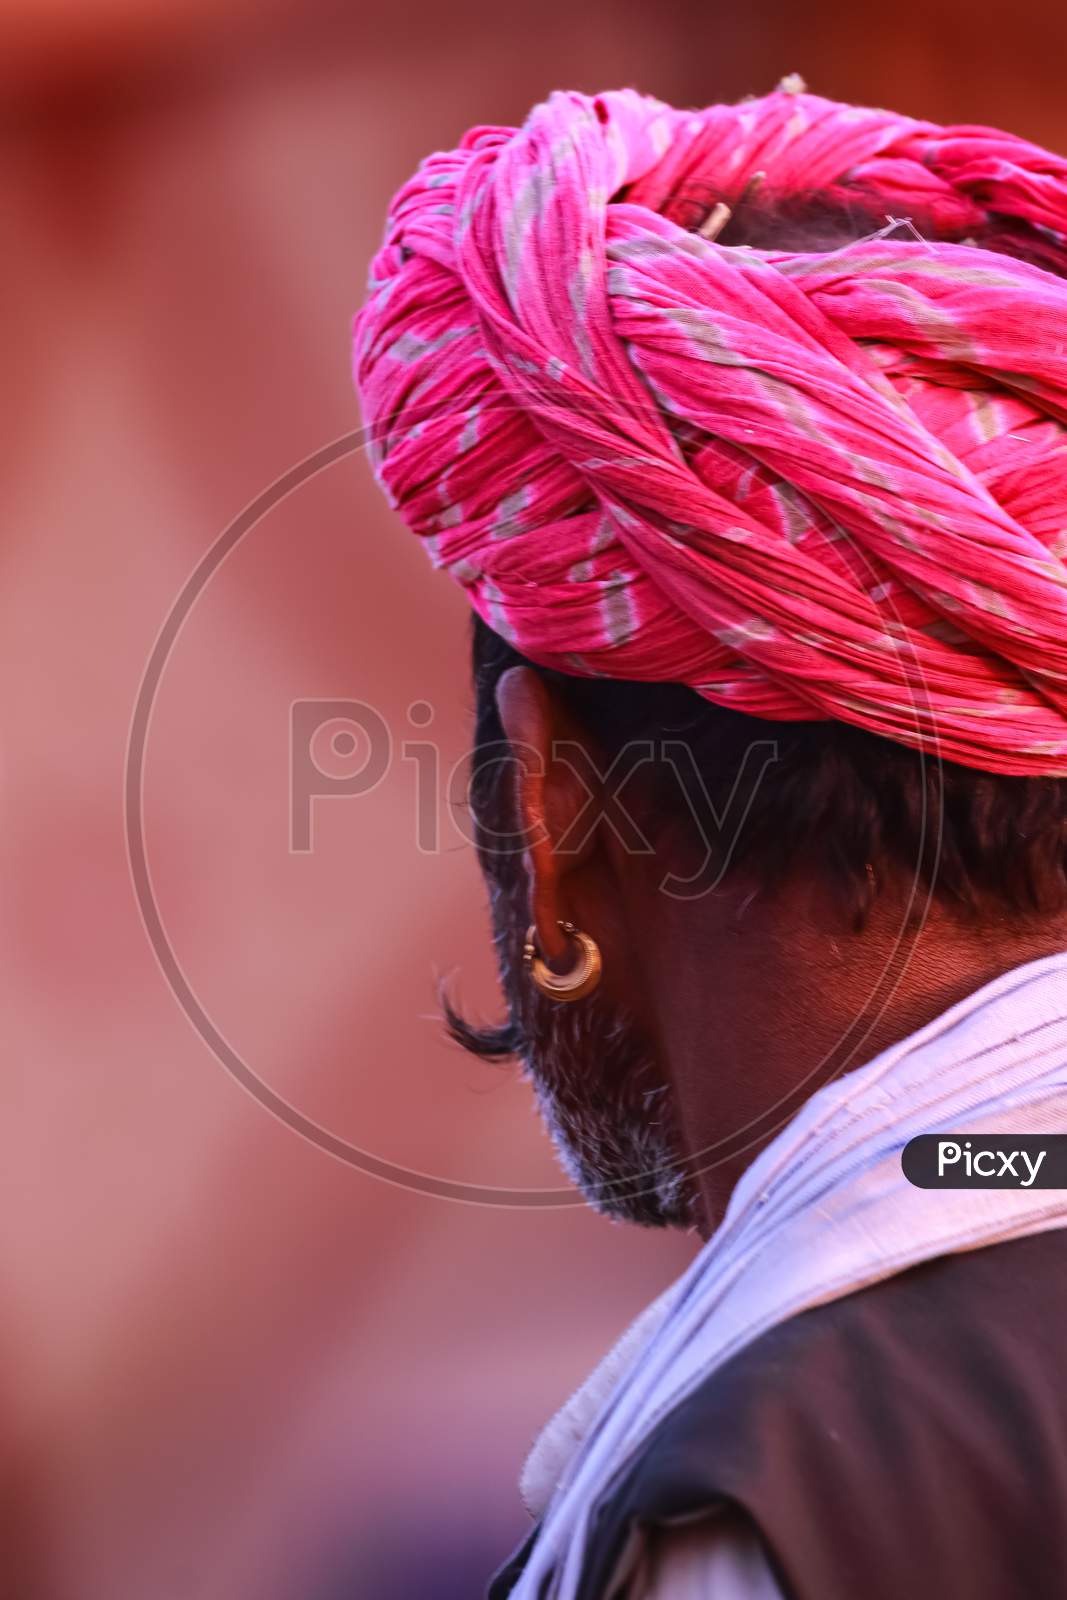 An Abstract side portrait of a Rajasthani man wearing a Pink turban